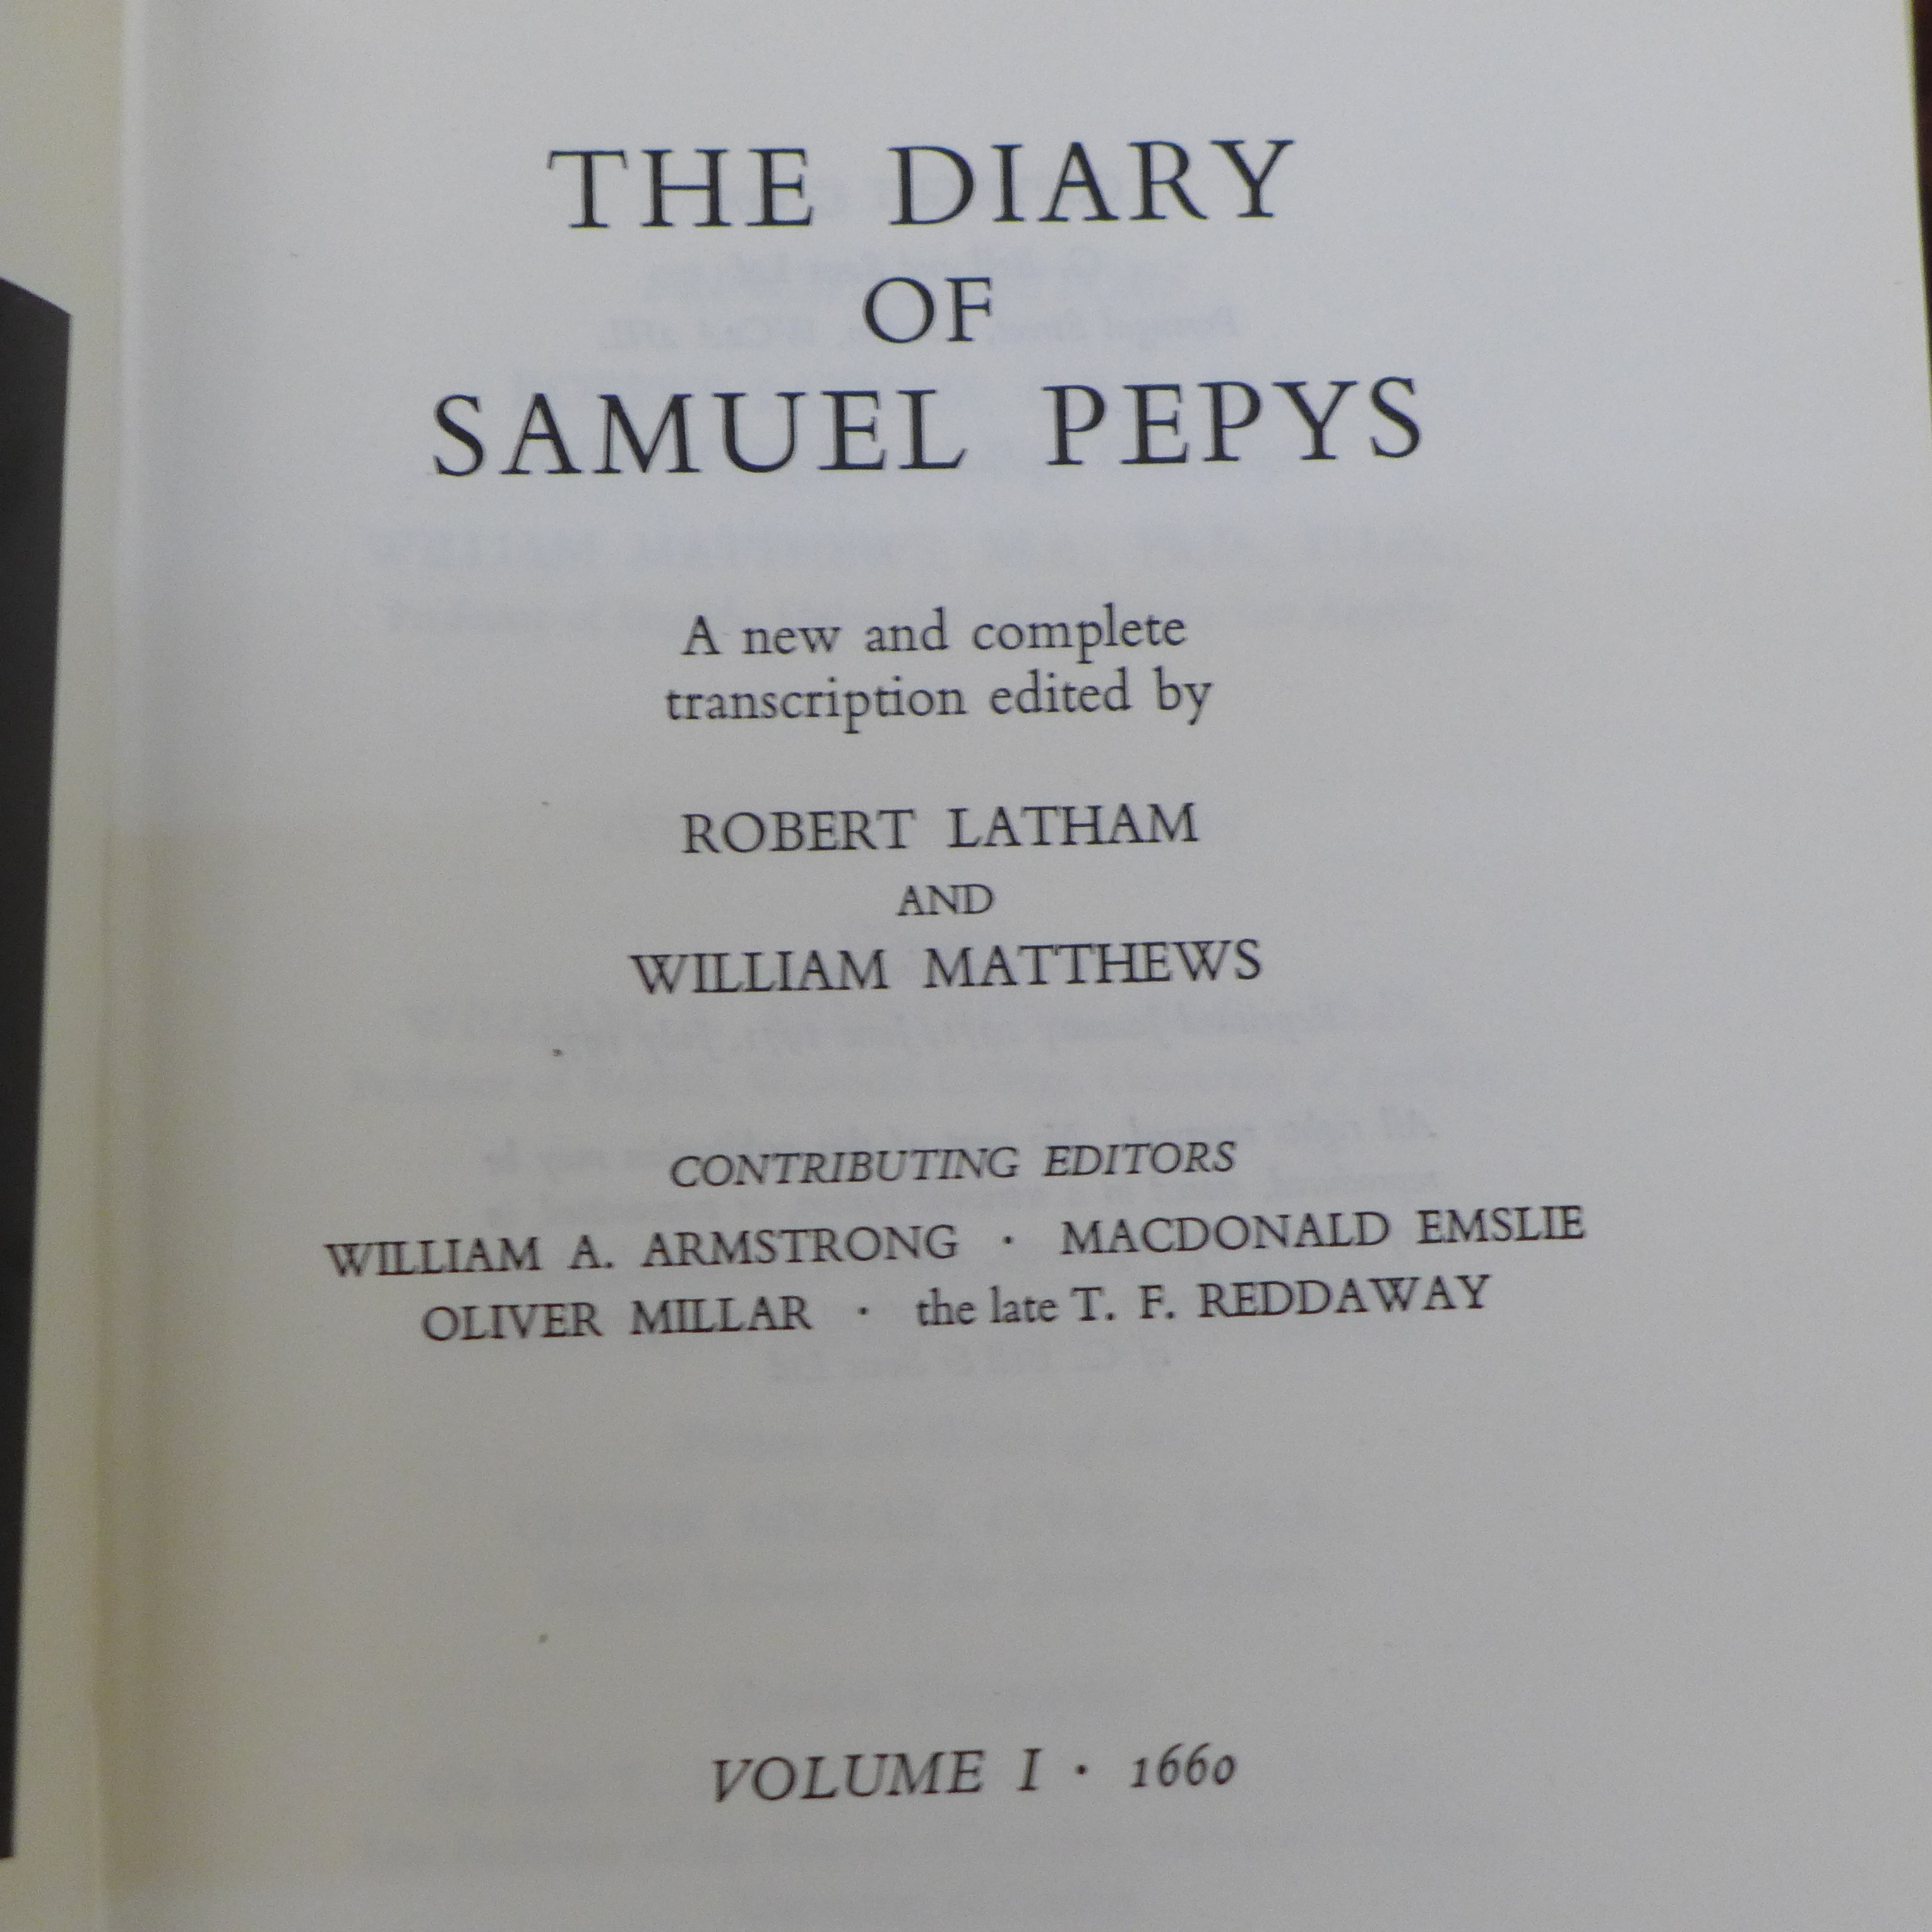 The Diary of Samuel Pepys, no. 1-11, published 1970s/80s by G Bell & Sons Ltd - Image 5 of 8